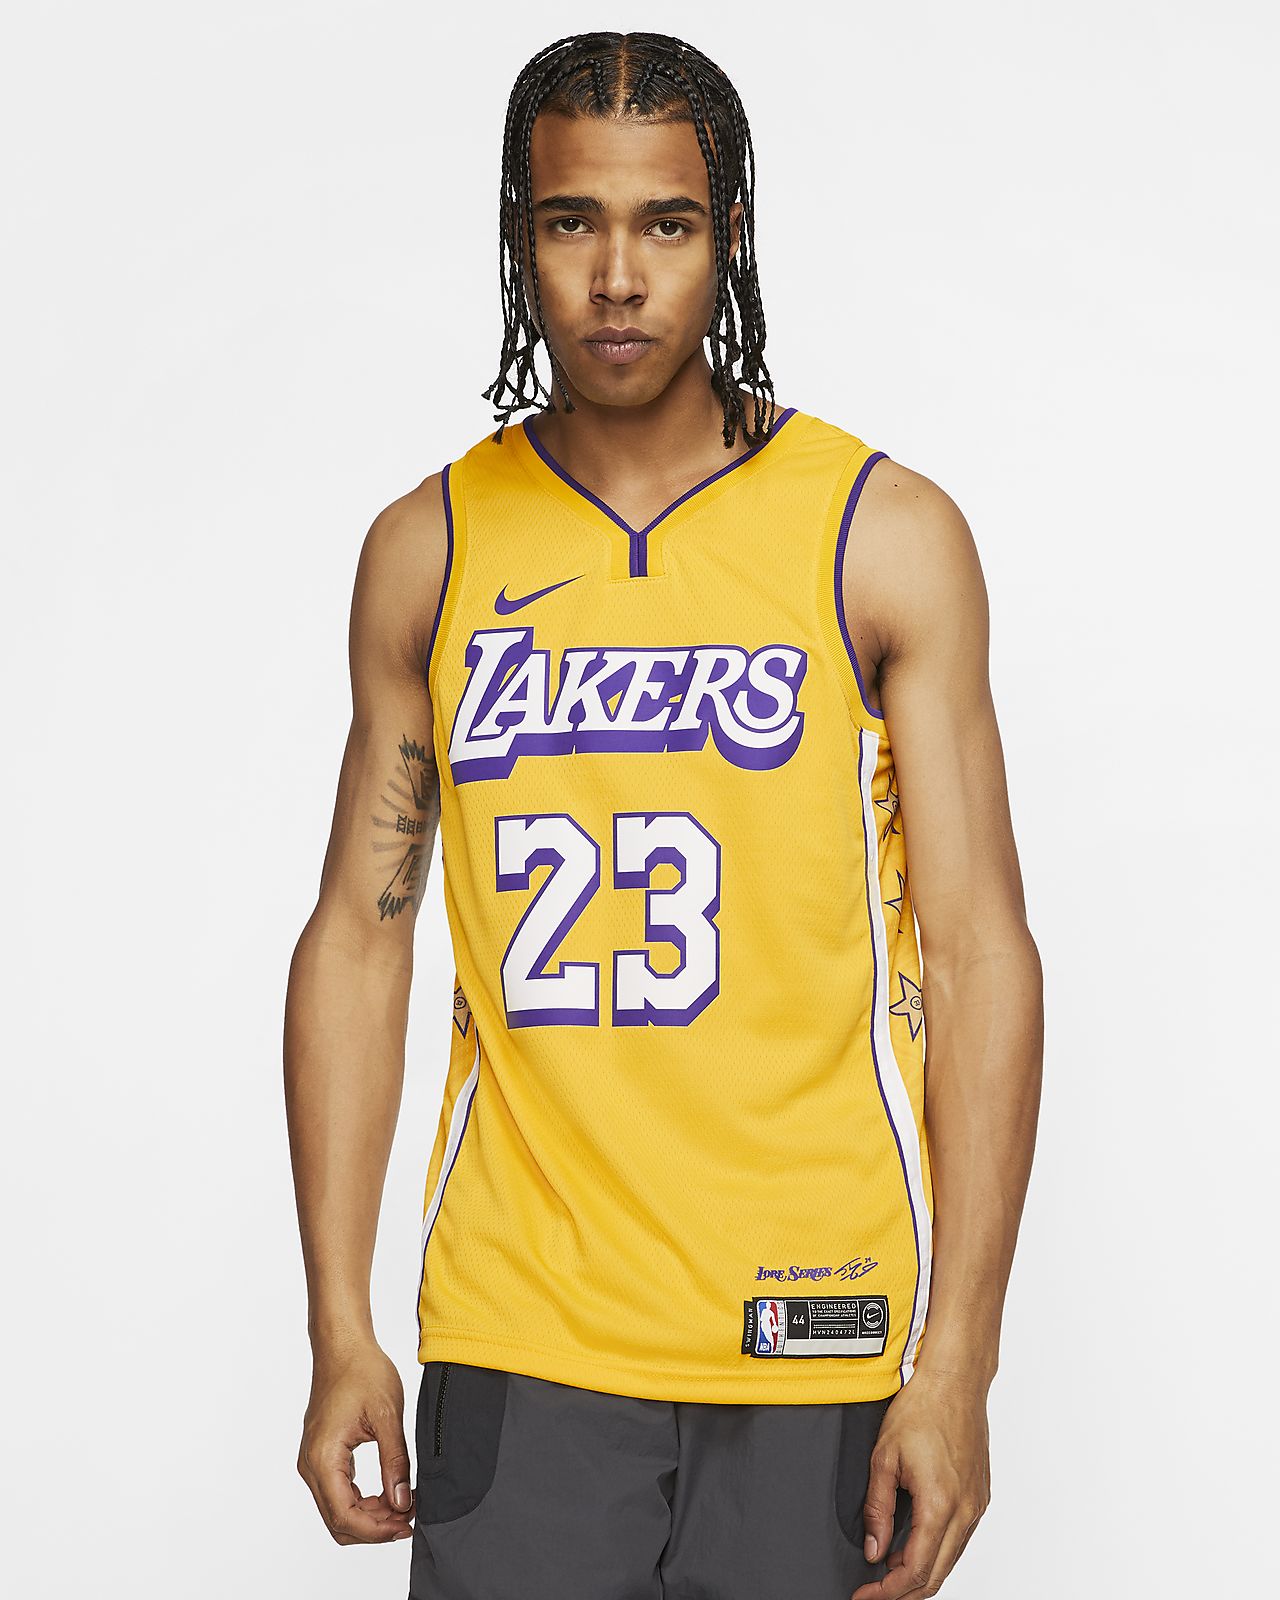 lakers jersey female jersey on sale